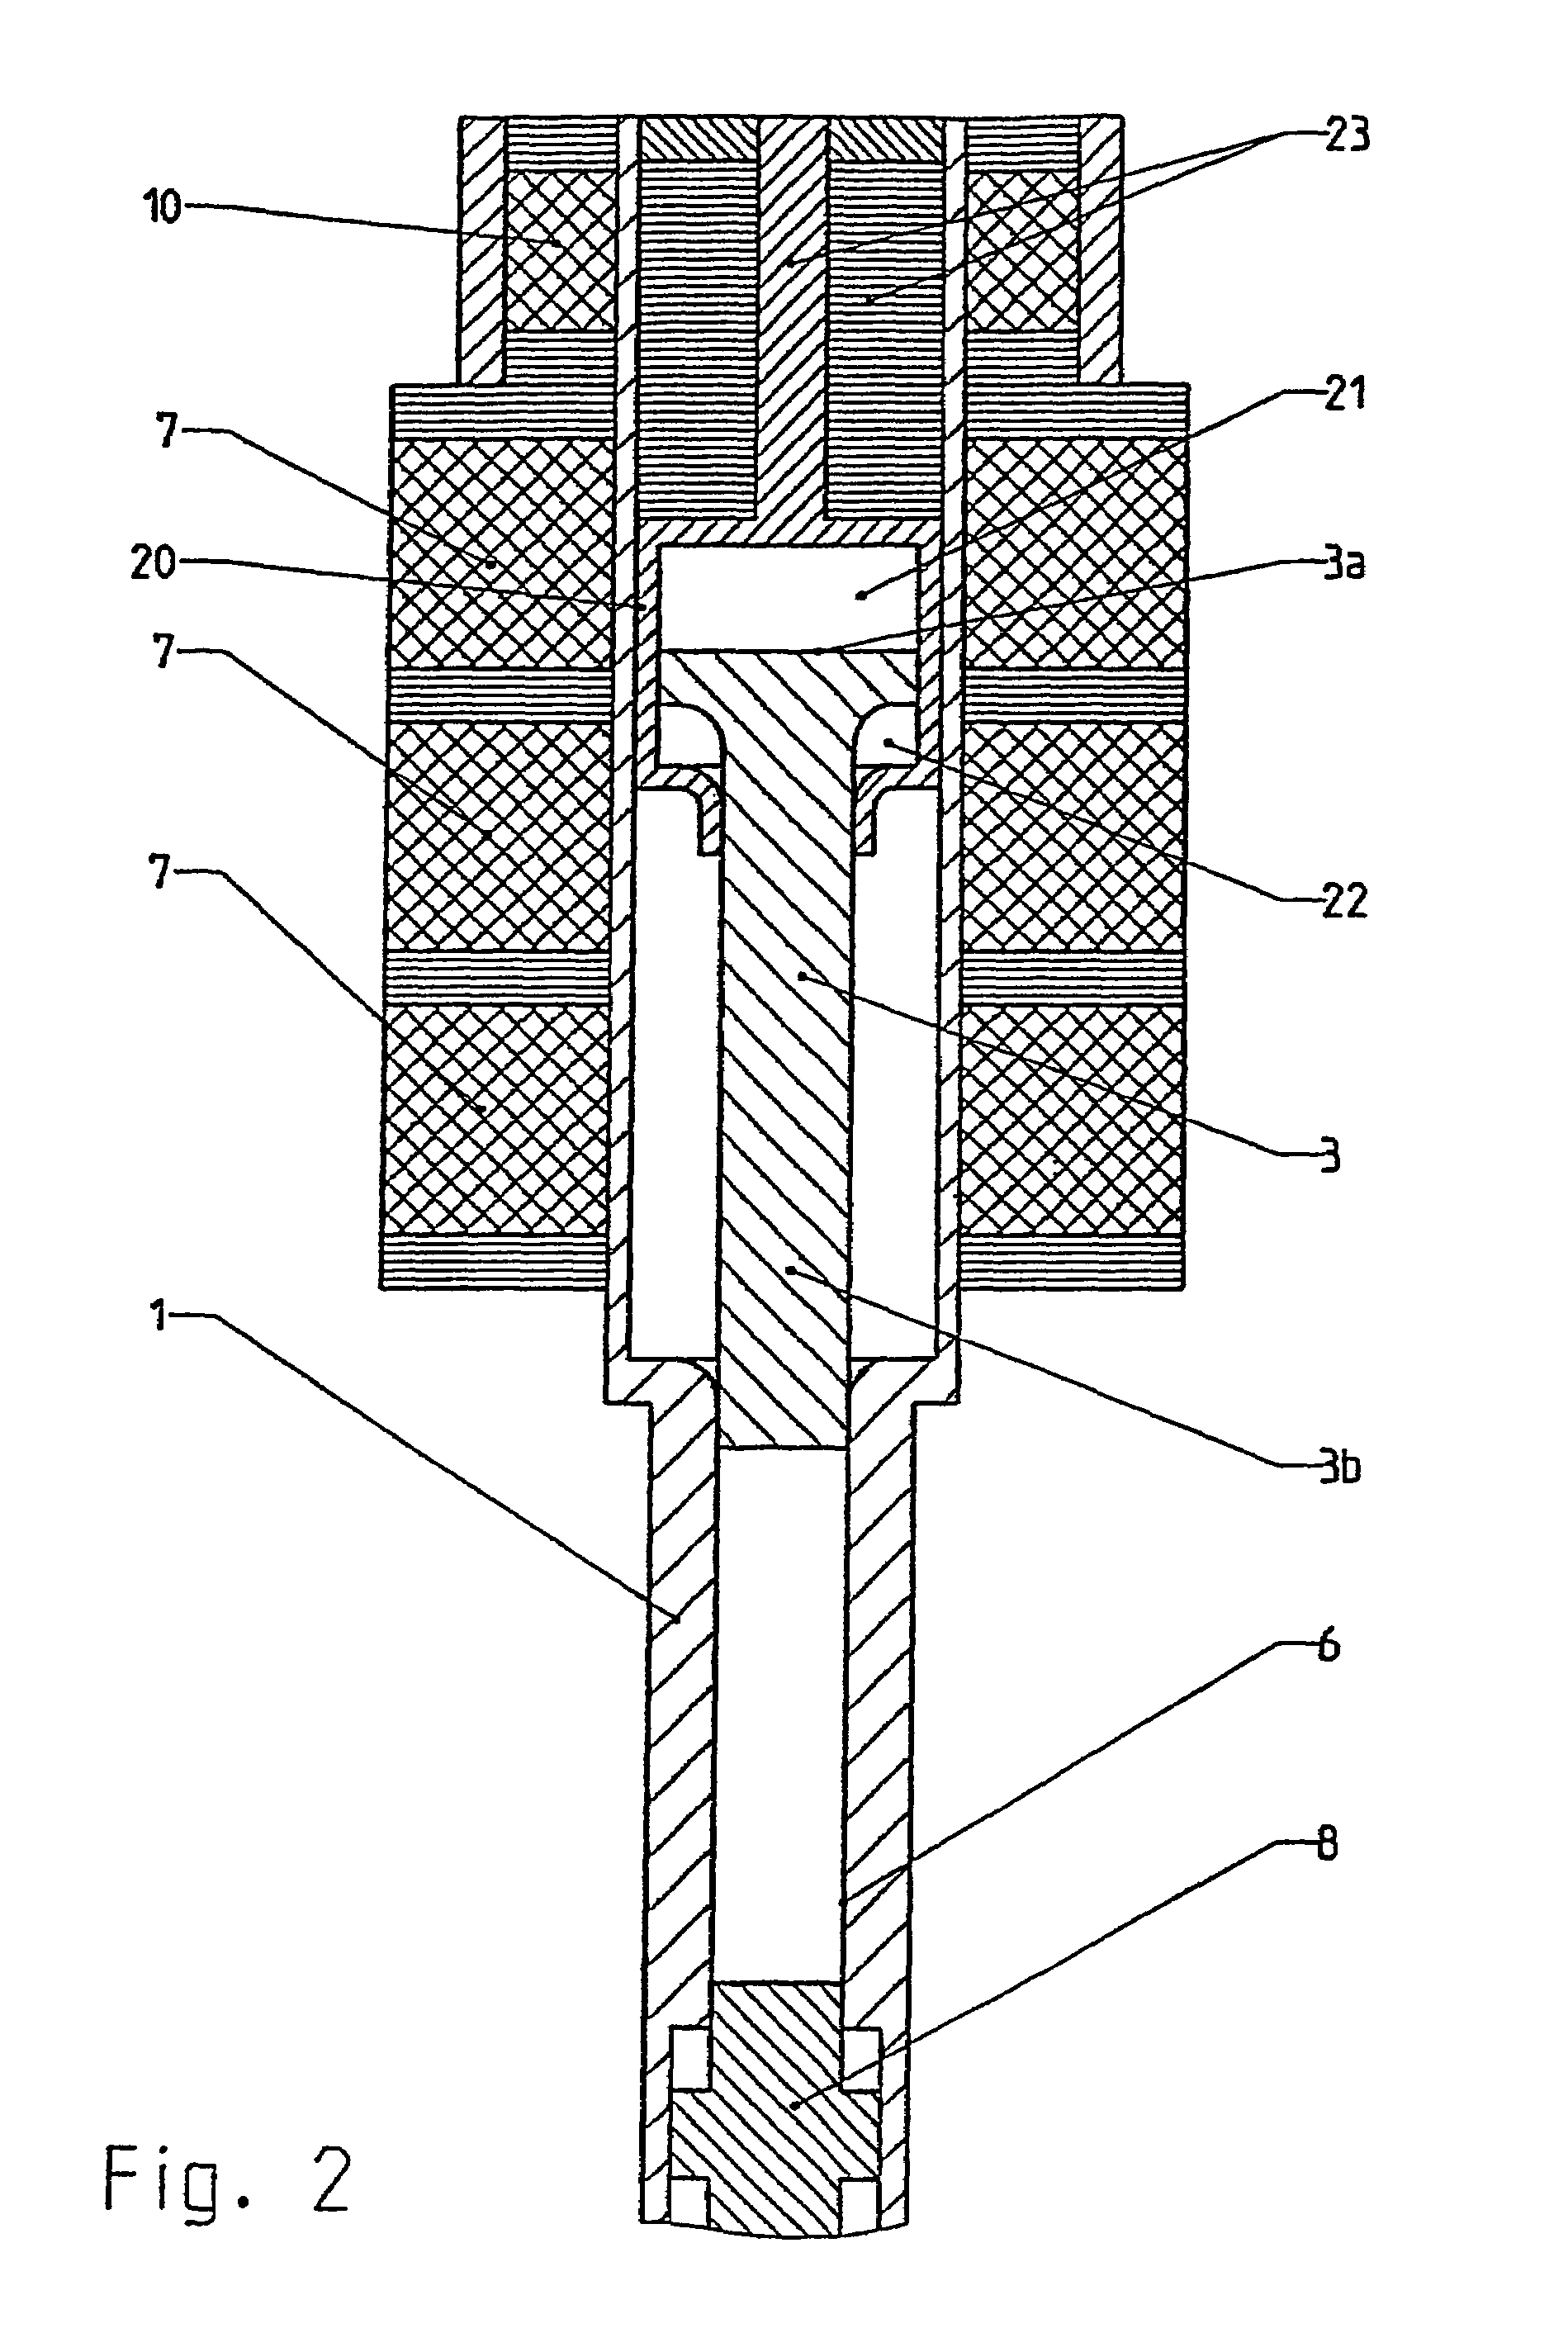 Pneumatic spring percussion mechanism with an electro-dynamically actuated driving piston